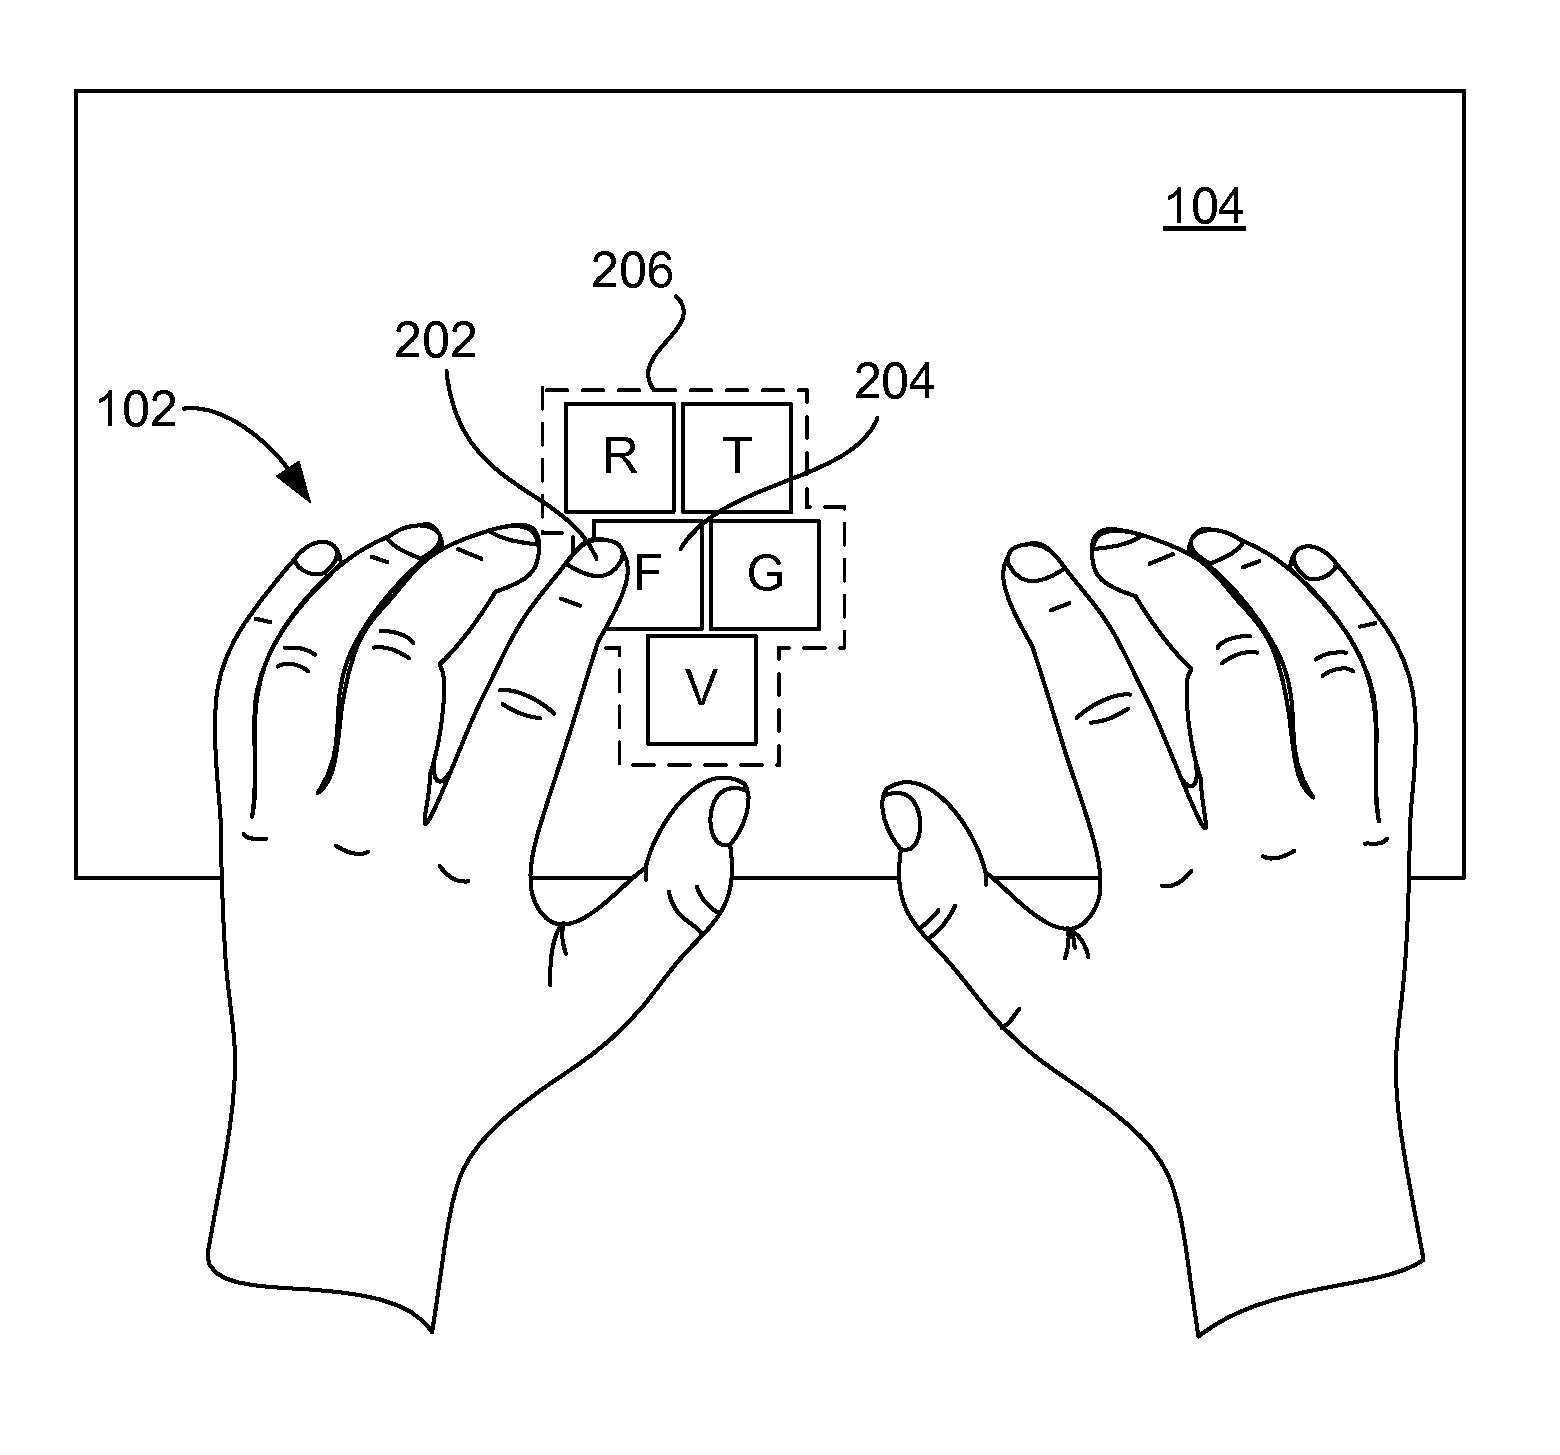 Dynamic text input using on and above surface sensing of hands and fingers